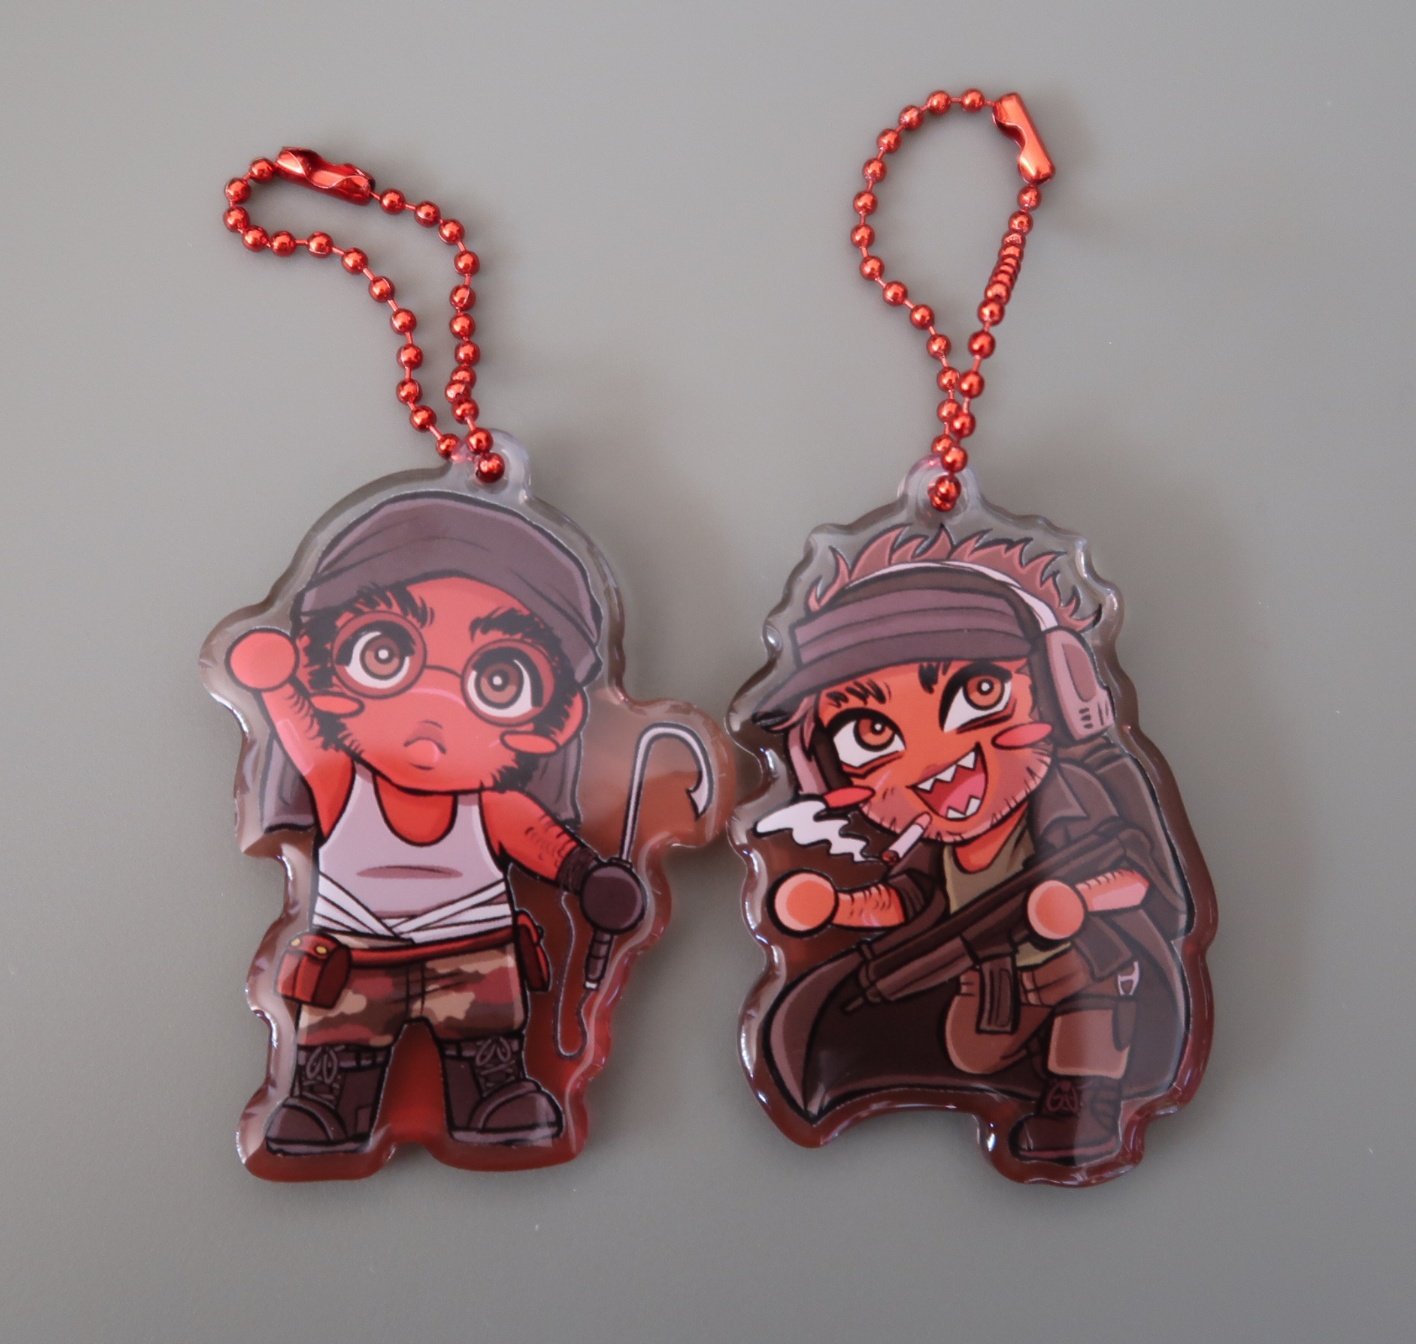 A photo of the two Sanmos charms, featuring my chibi designs, a red gradient background, and a red ball chain connector.